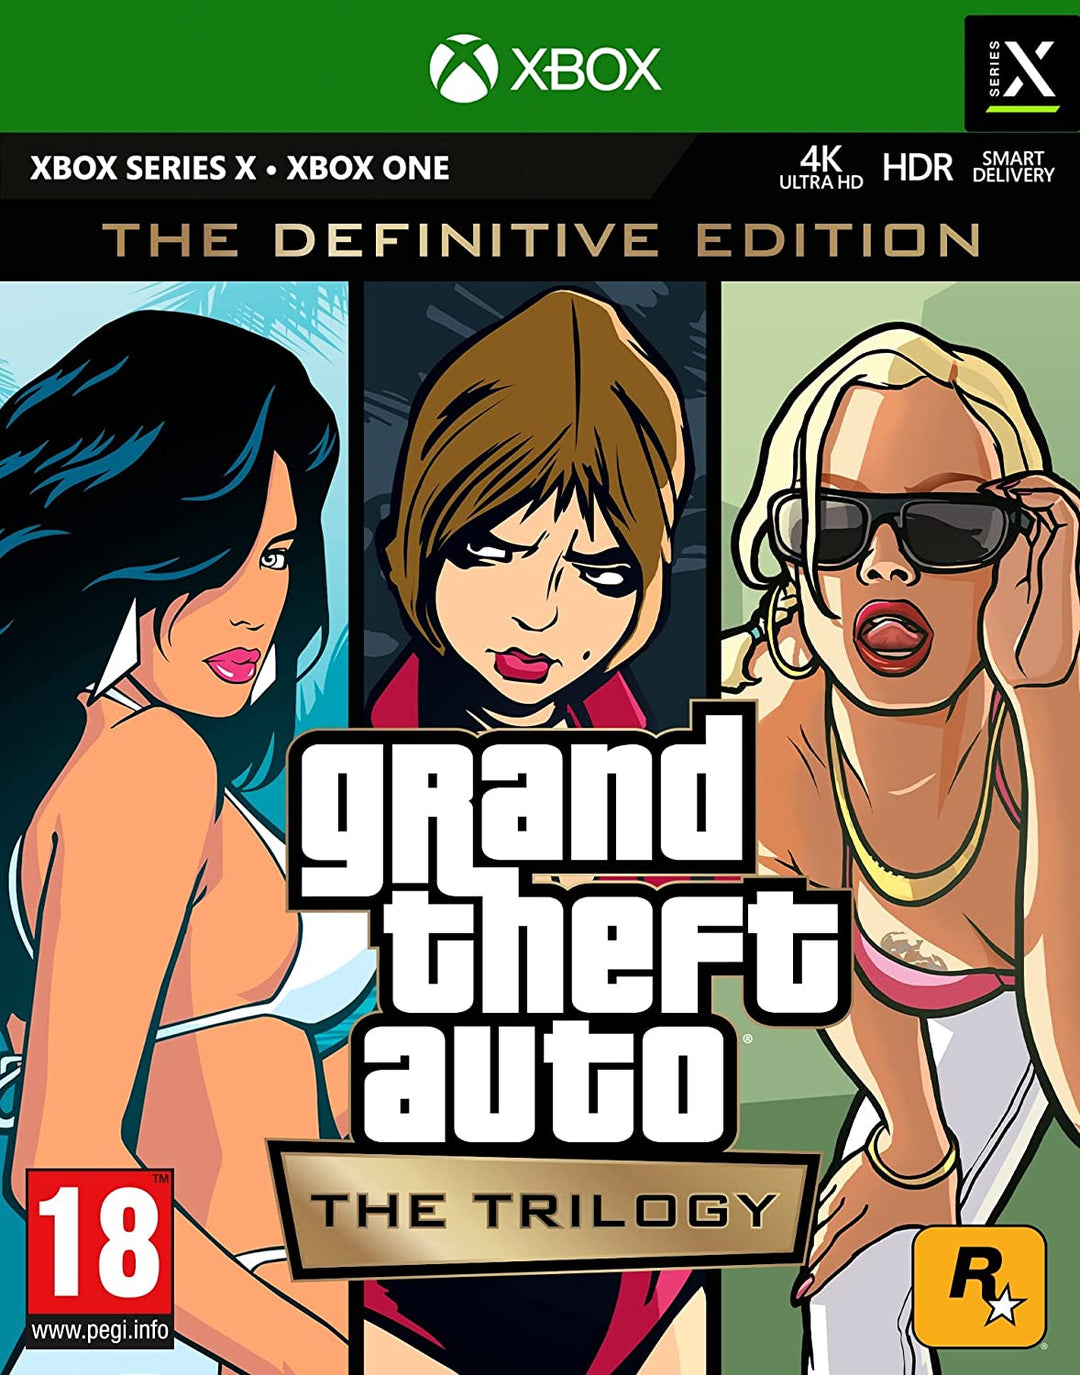 Rockstar Grand Theft Auto The Trilogy – The Definitive Edition